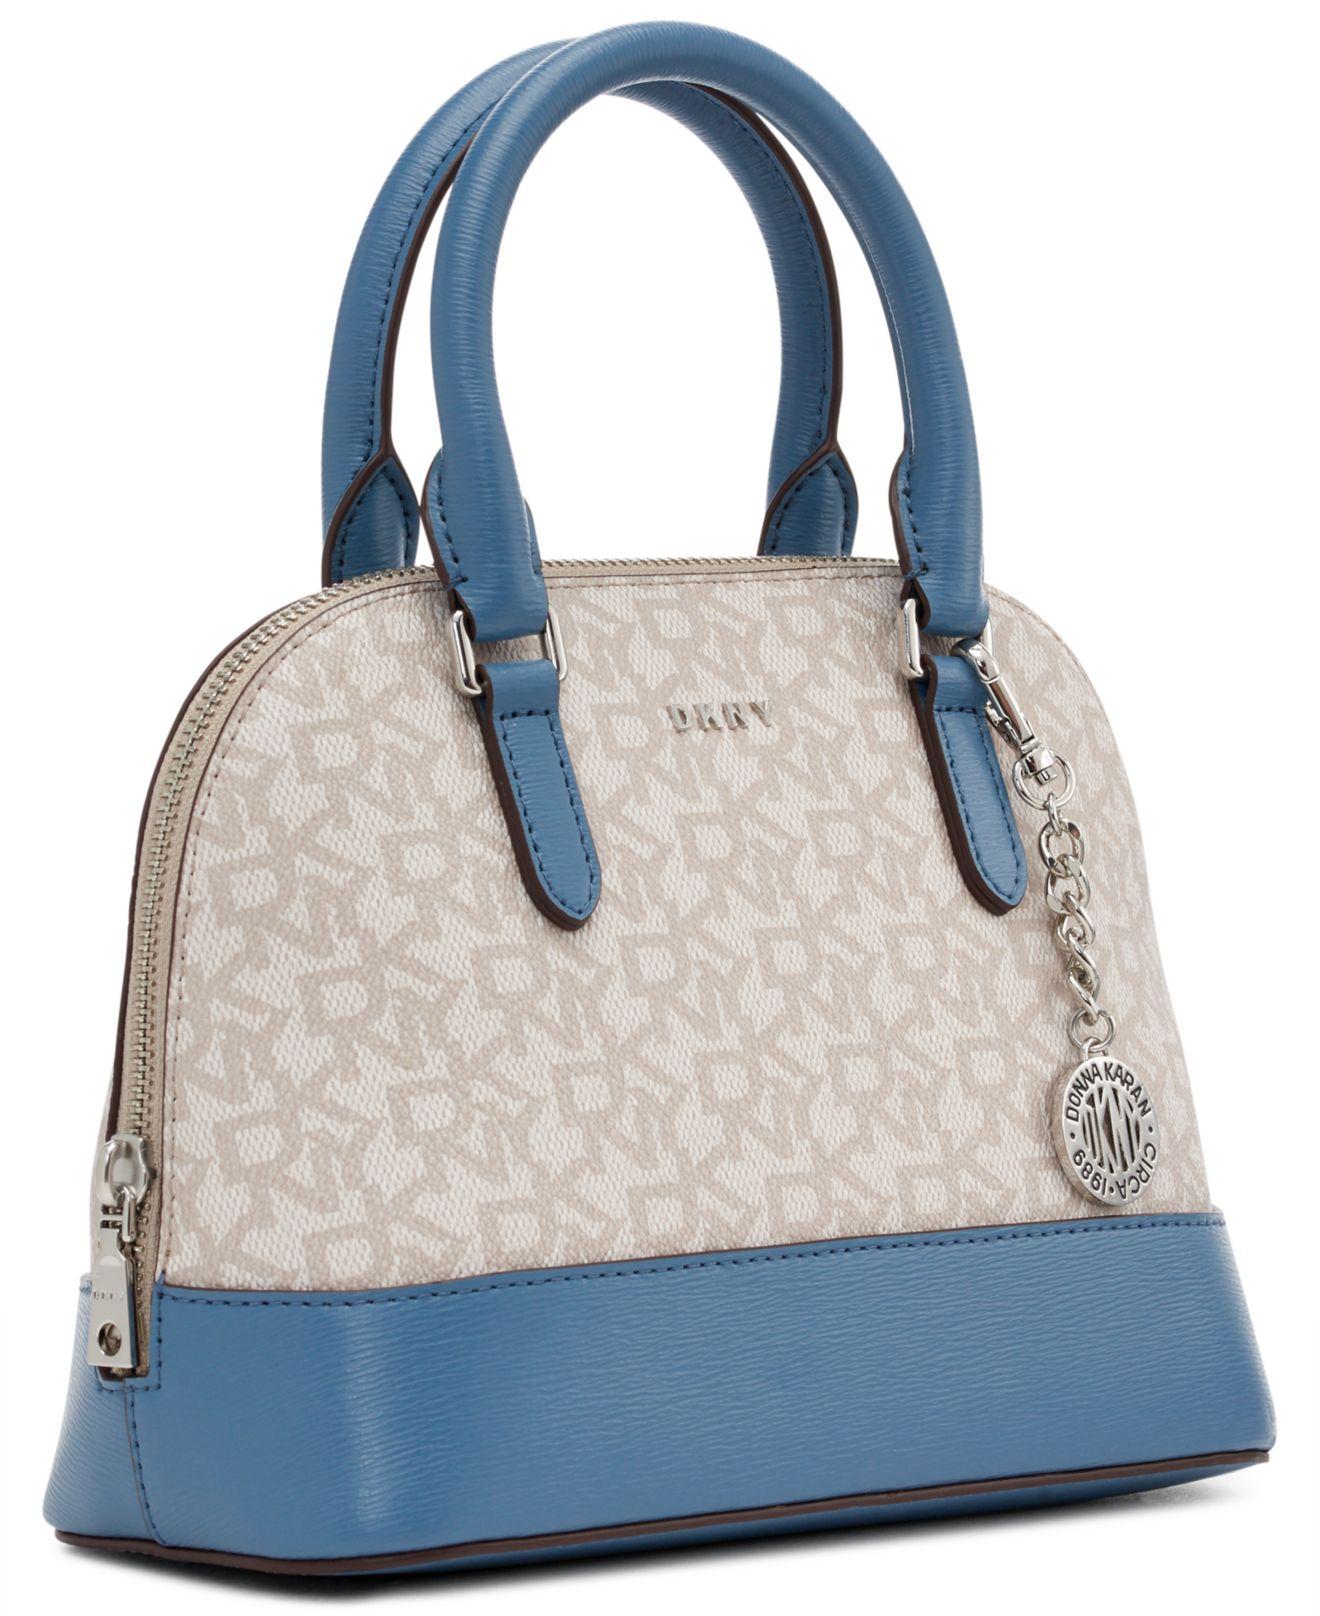 DKNY Leather Bryant Dome Satchel in Blue - Lyst